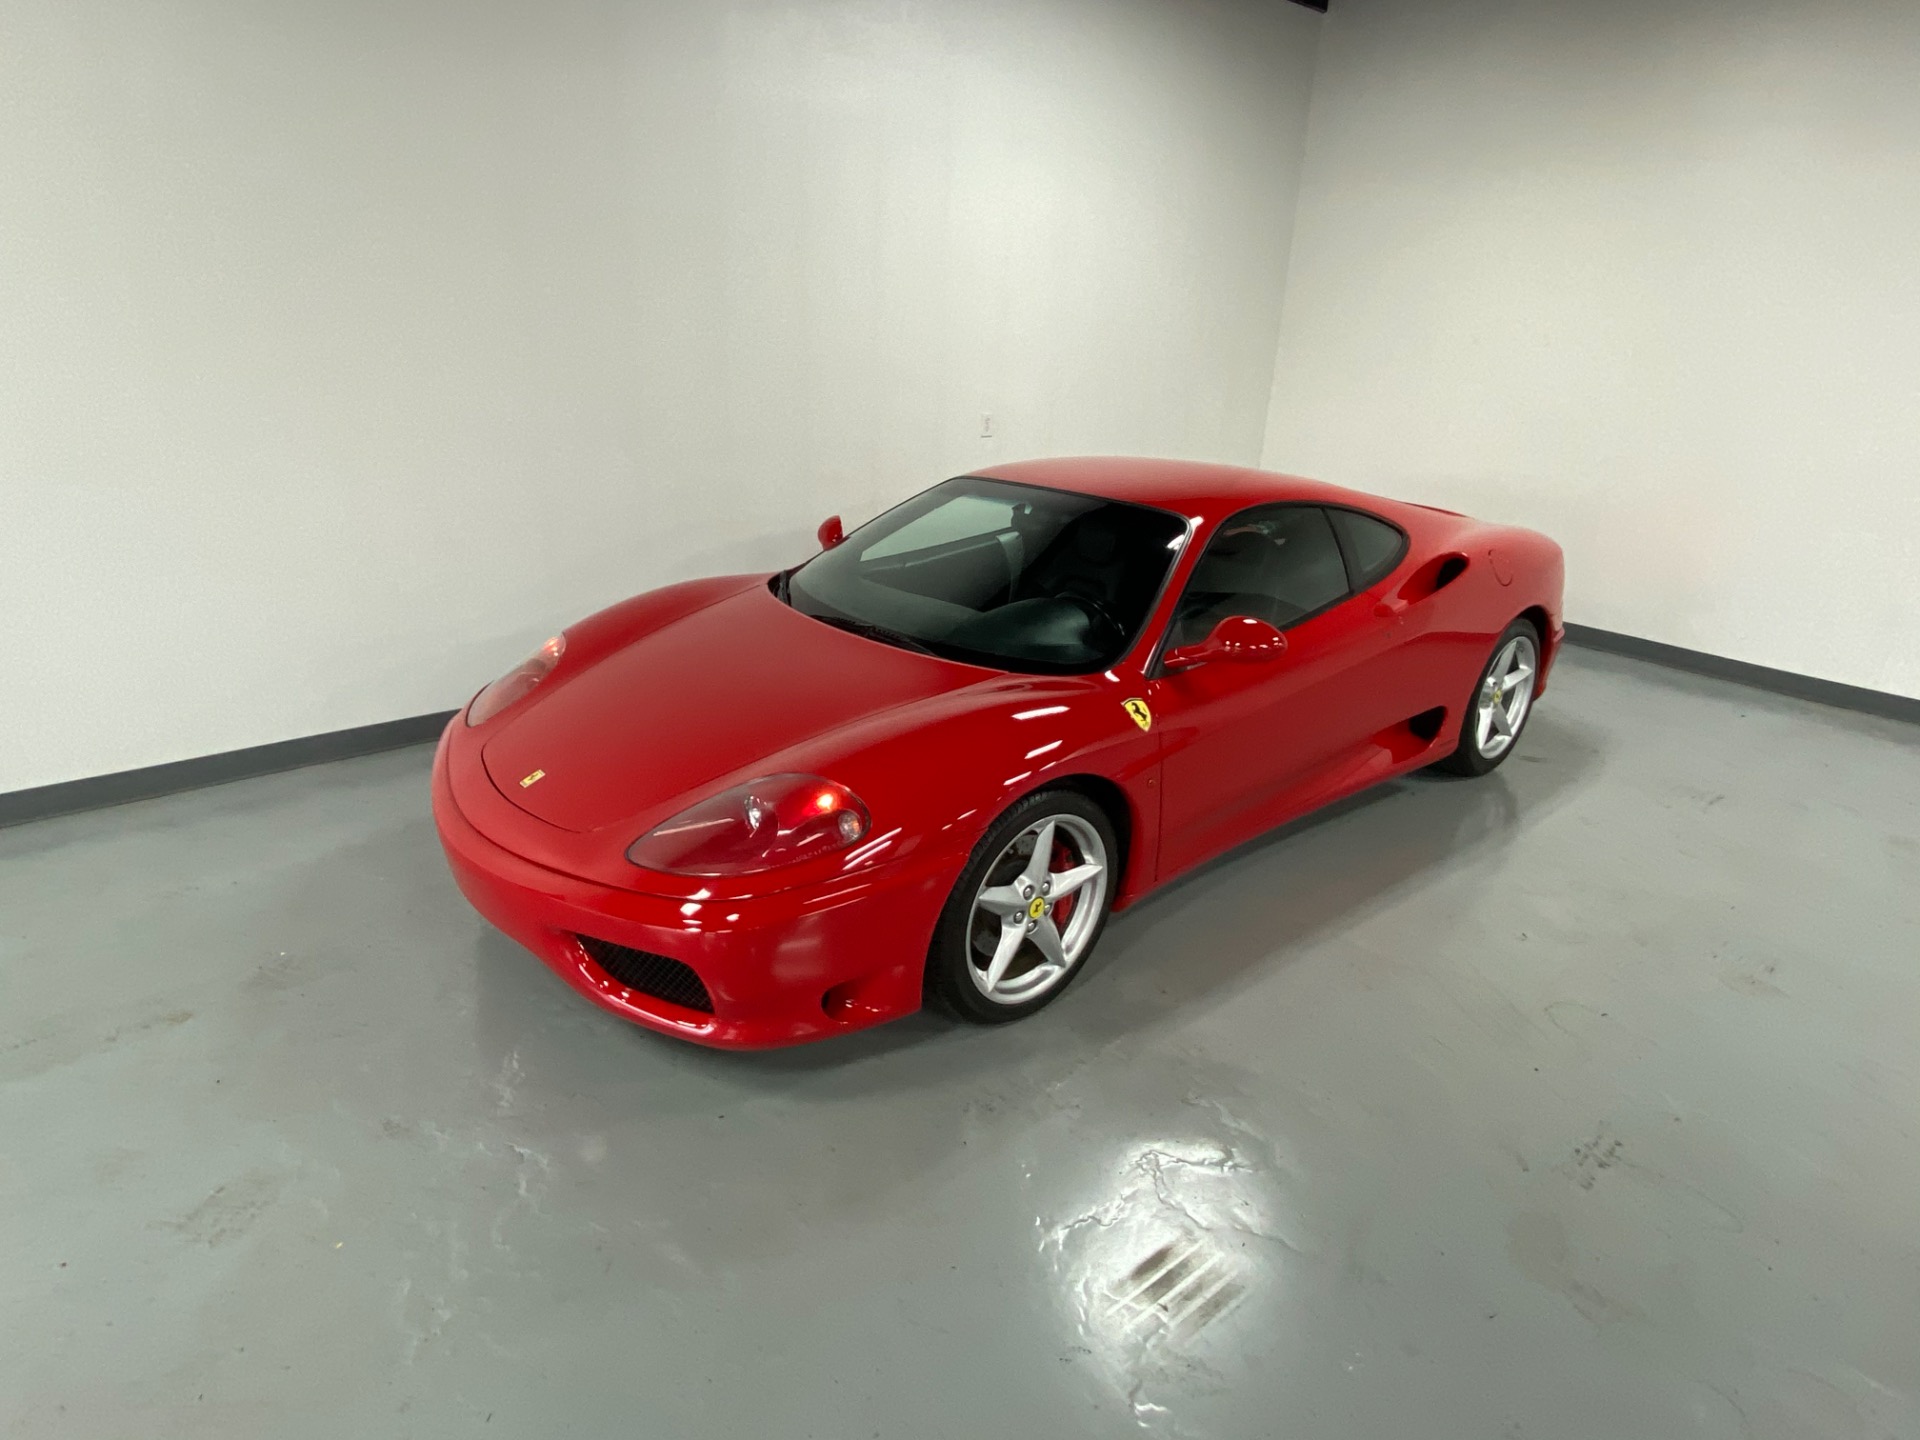 Used 2000 Red Ferrari 360 Modena Salvage Title Local Trade In Gated Manual Modena For Sale Sold Prime Motorz Stock 3324